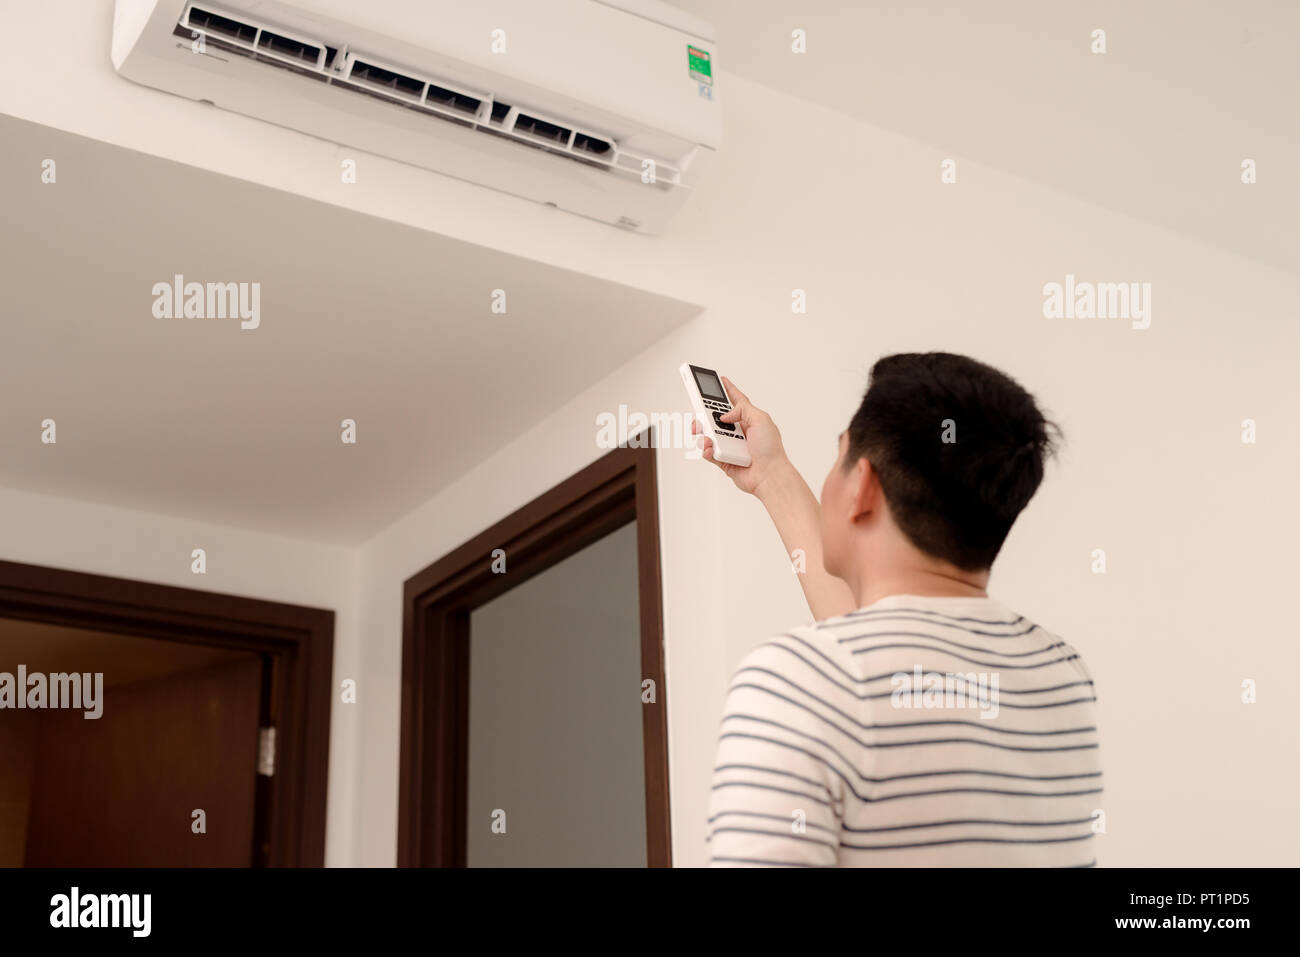 Wall Mounted Air Conditioner High Resolution Stock Photography And Images Alamy